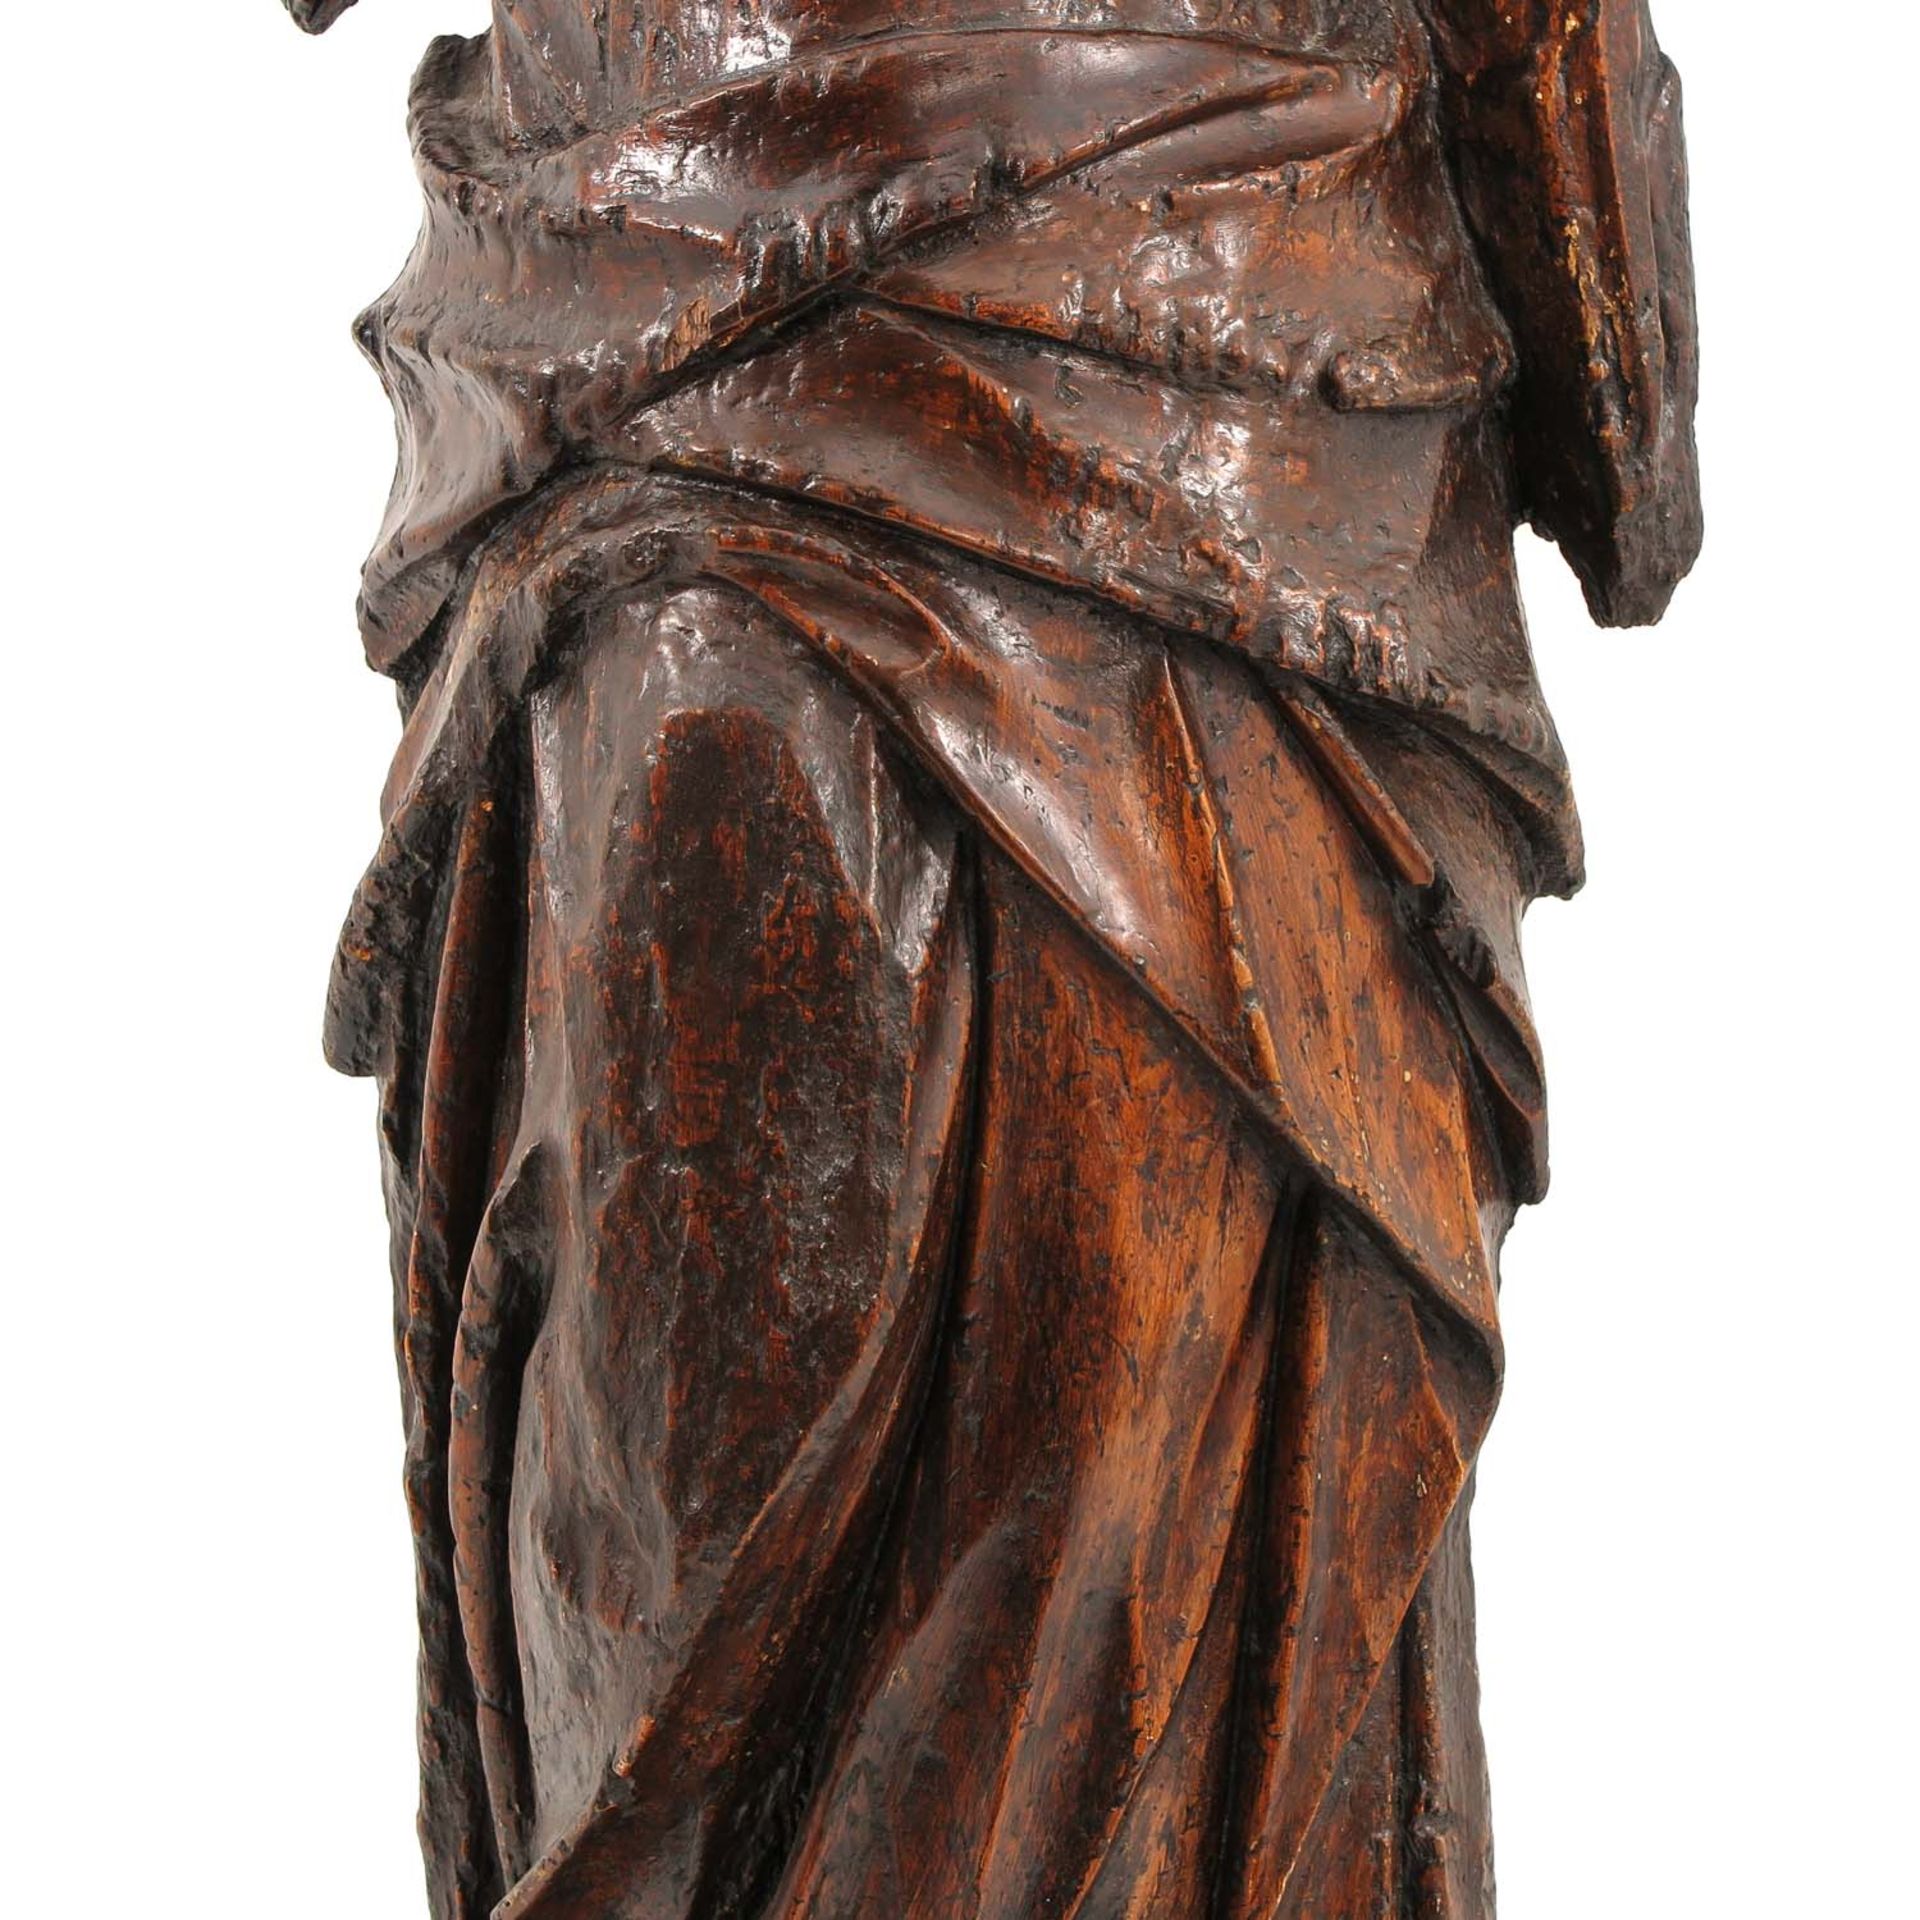 A 16th - 17th Century Religious Sculpture - Image 4 of 8